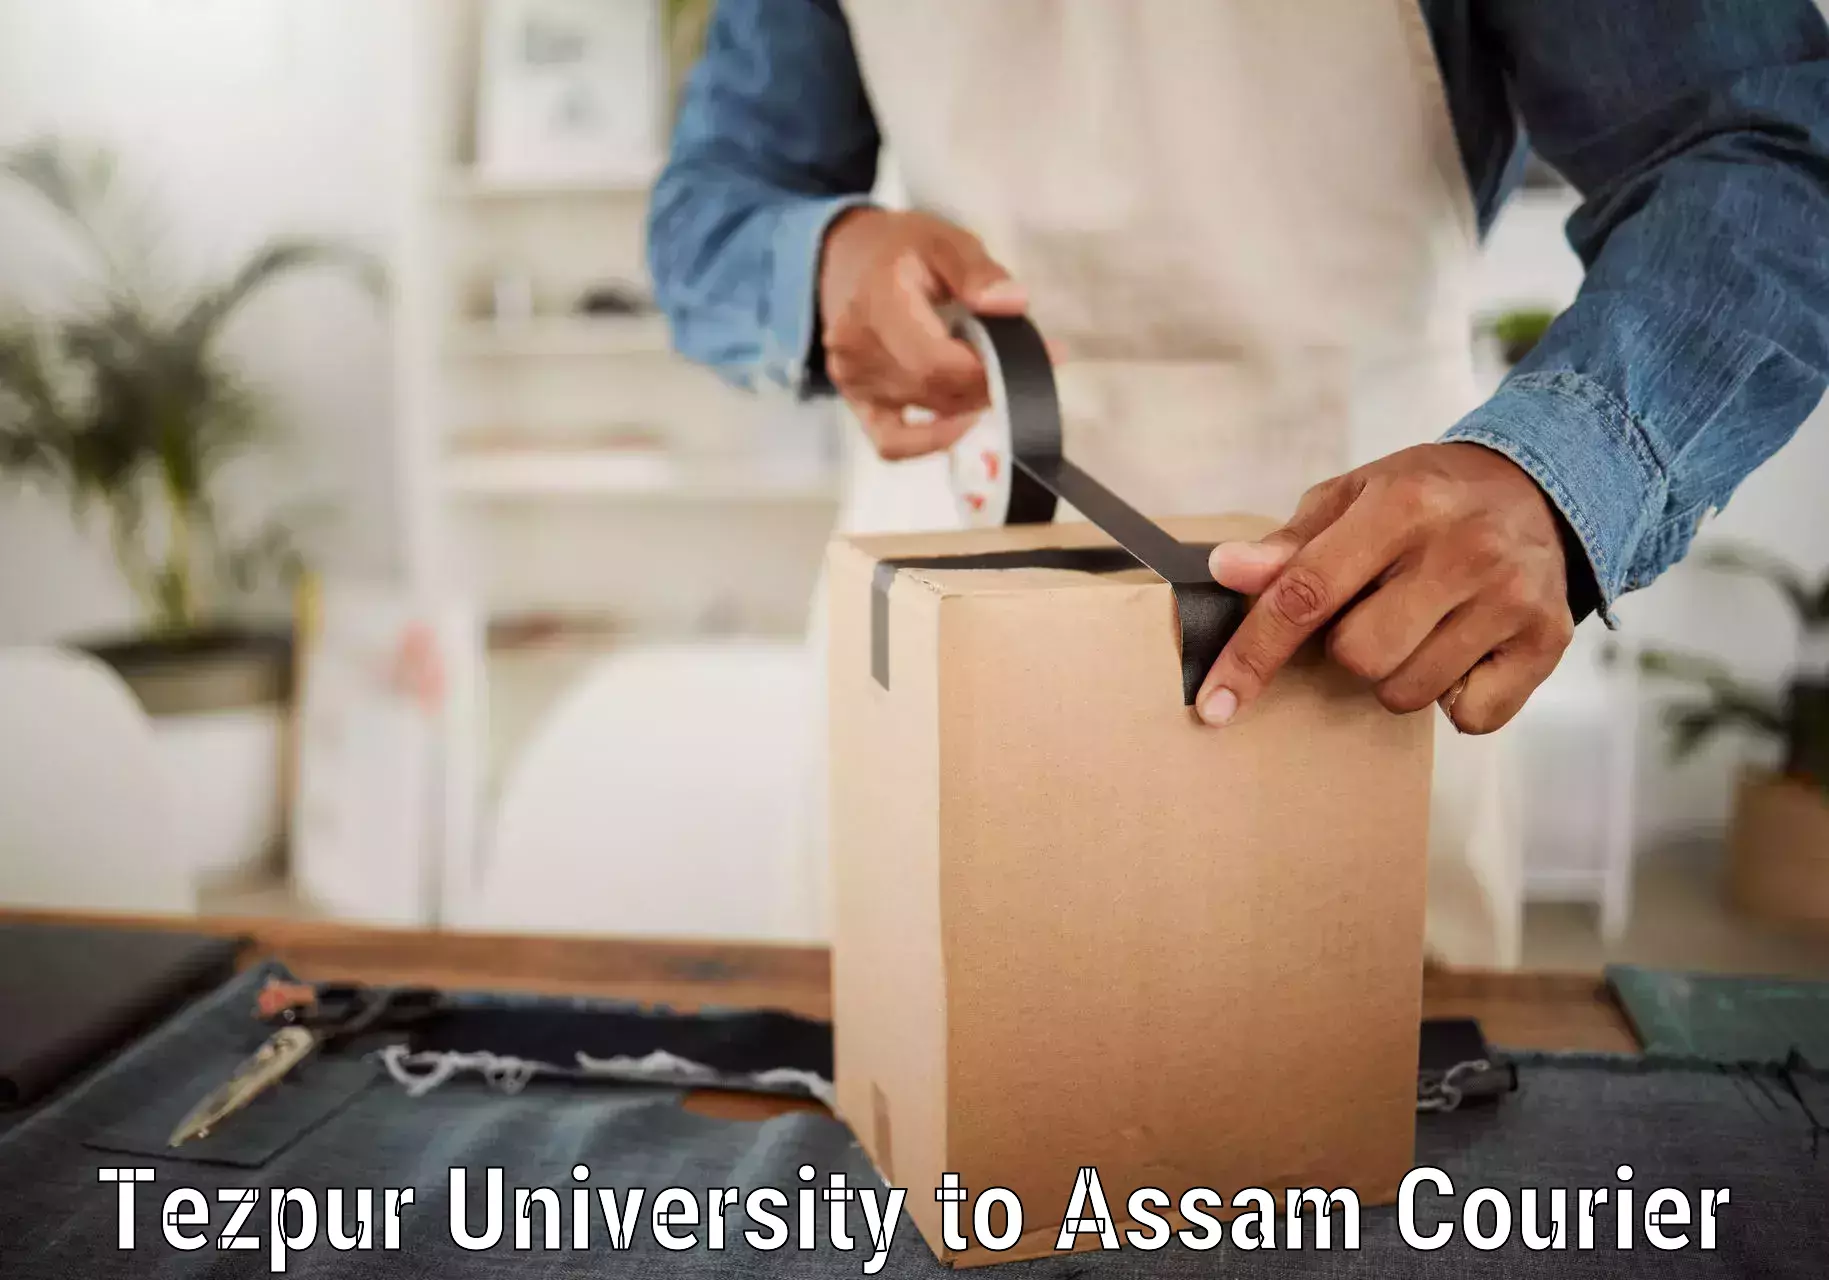 Weekend courier service Tezpur University to Dhemaji